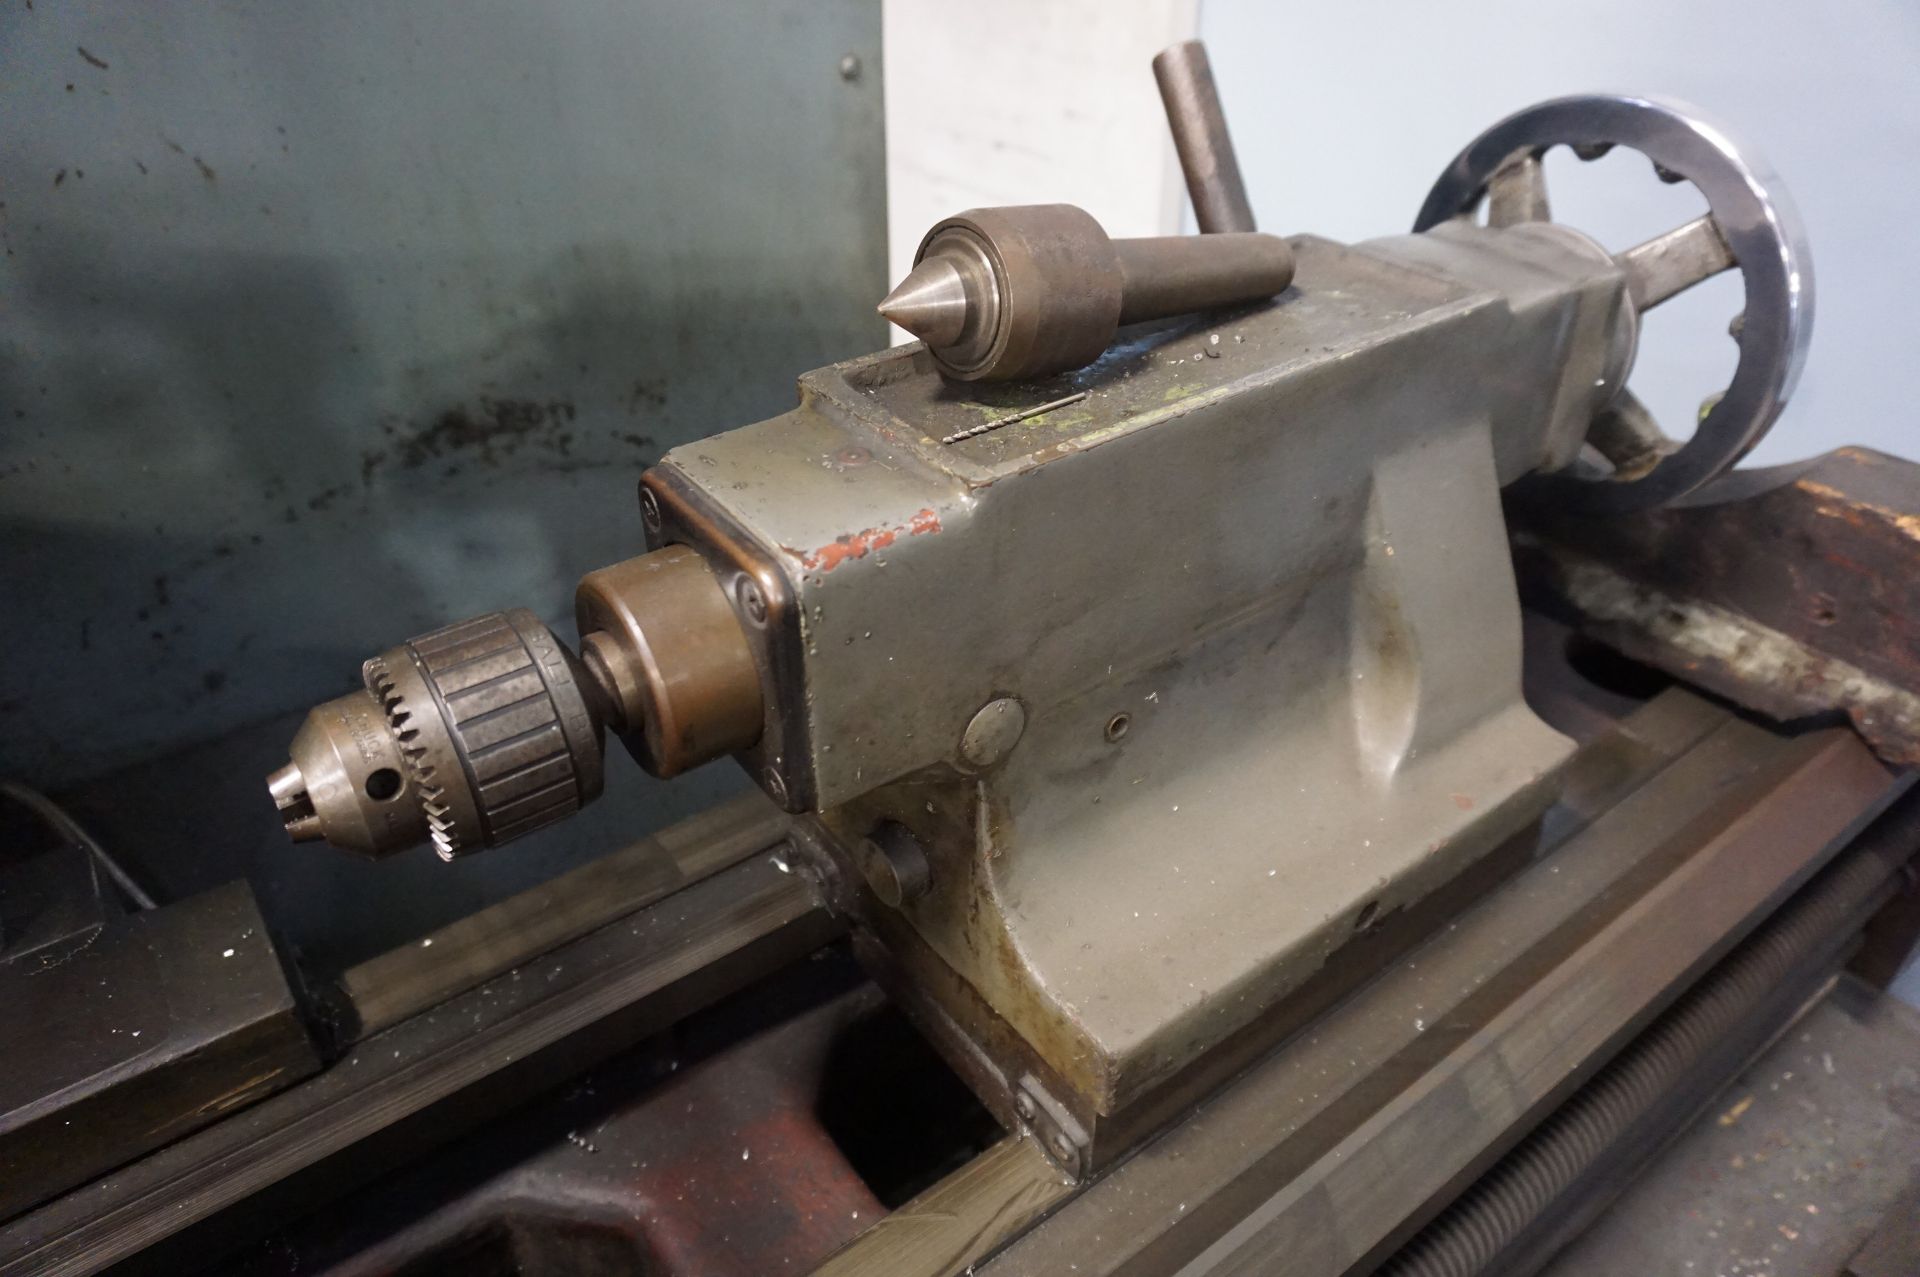 1988 WHACHEON TRADEMARK WL-435 X 1000G MACHINE LATHE WITH TAILSTOCK, S/N 8803-51 TO INCLUDE SONY